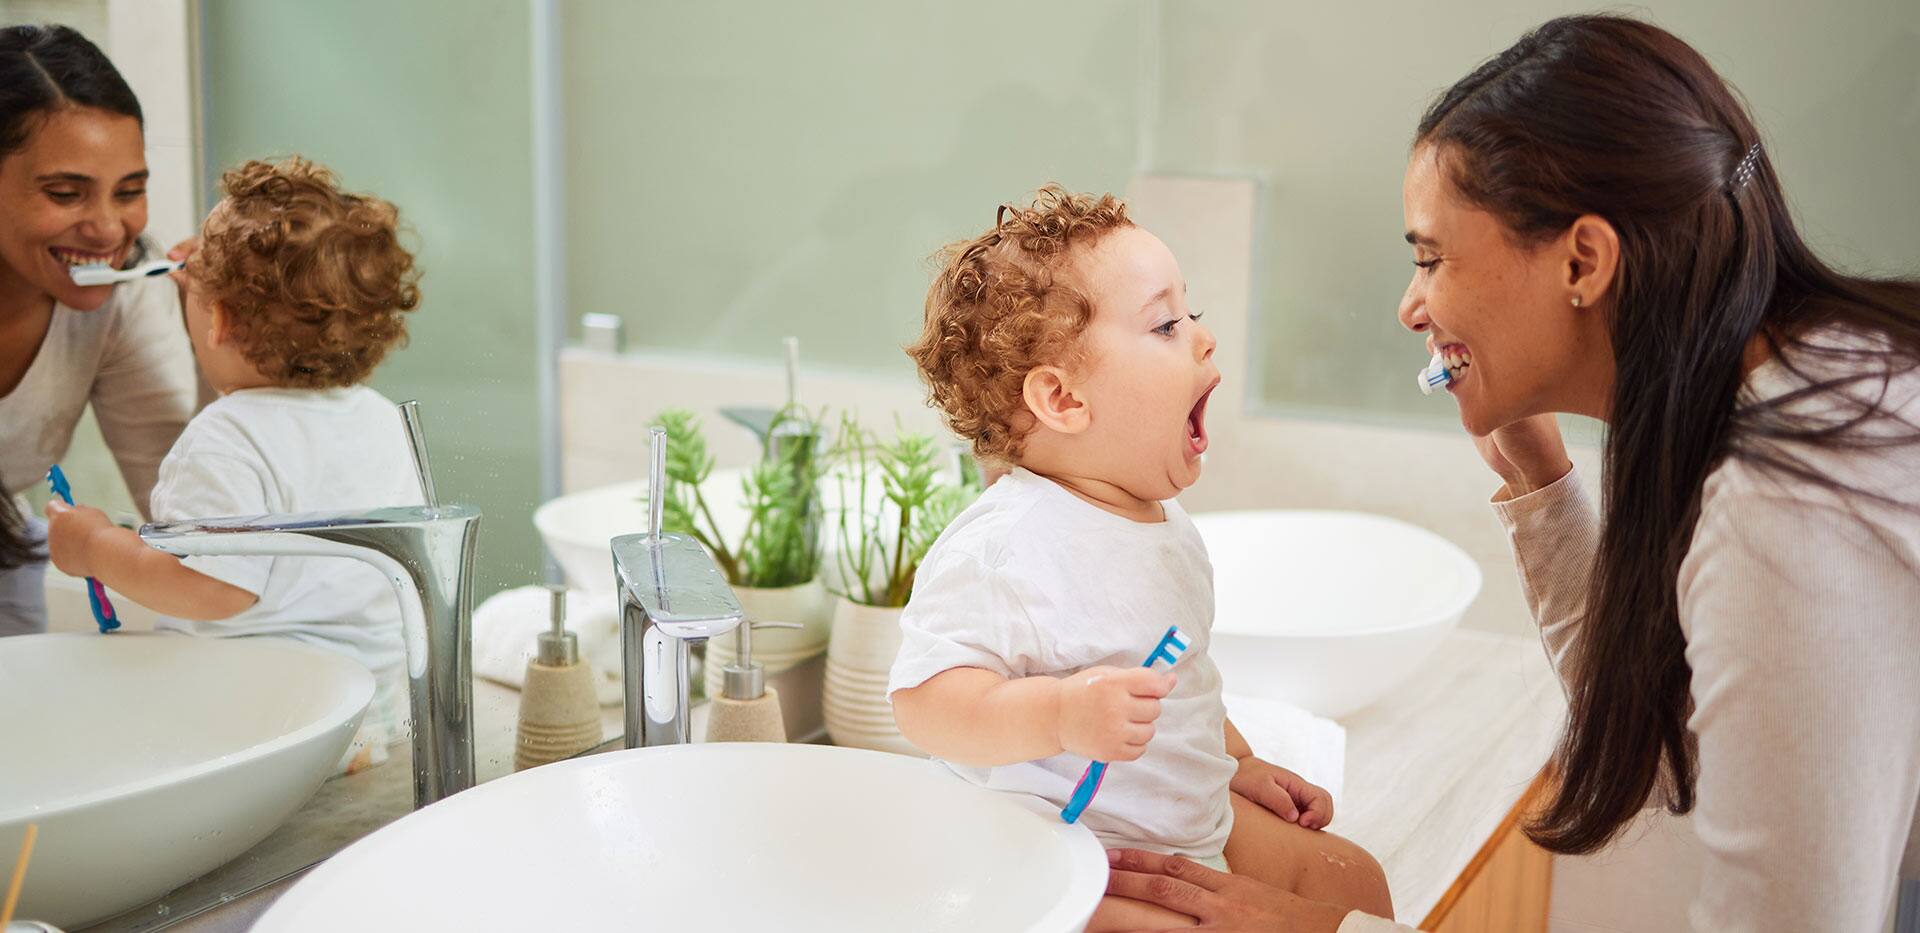 Mom teaching baby to brush its teeth, on the bathroom counter in home and a clean smile on her face. Healthy oral hygiene for kid means using child friendly toothpaste, toothbrush and dental routine